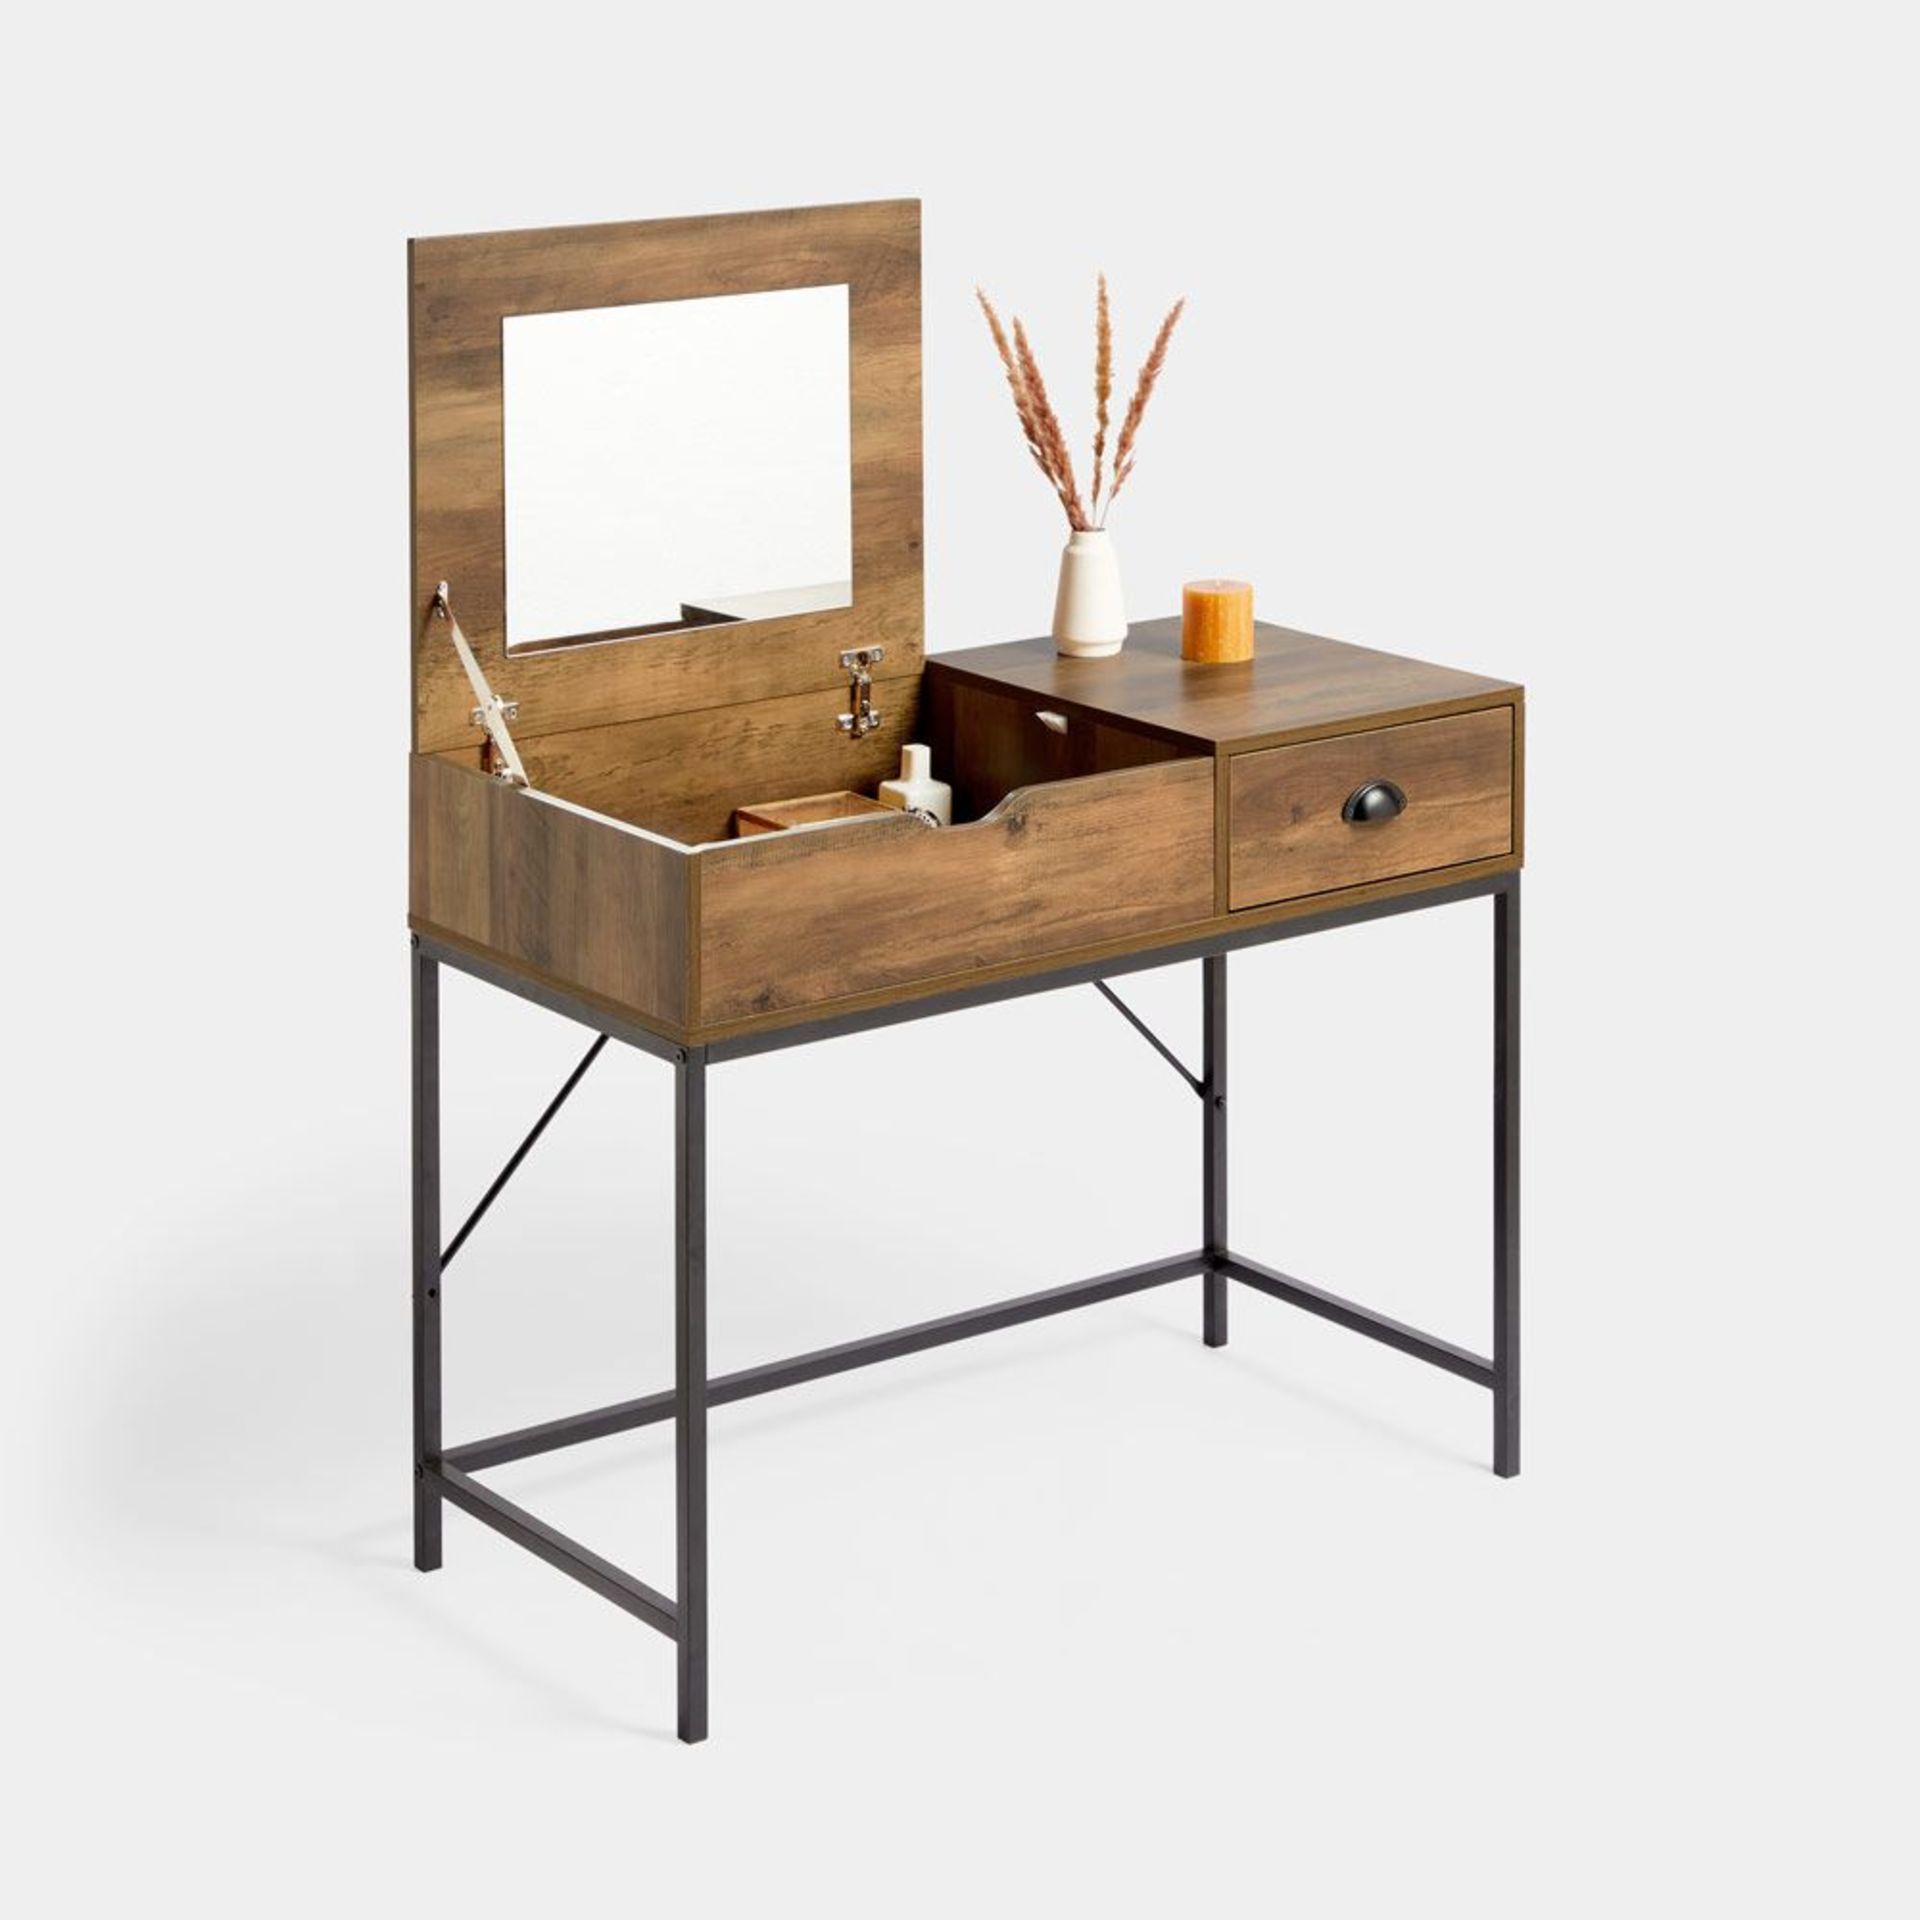 Jaxon Dressing Table with Flip Up Mirror. - BI. Featuring an industrial black metal frame and